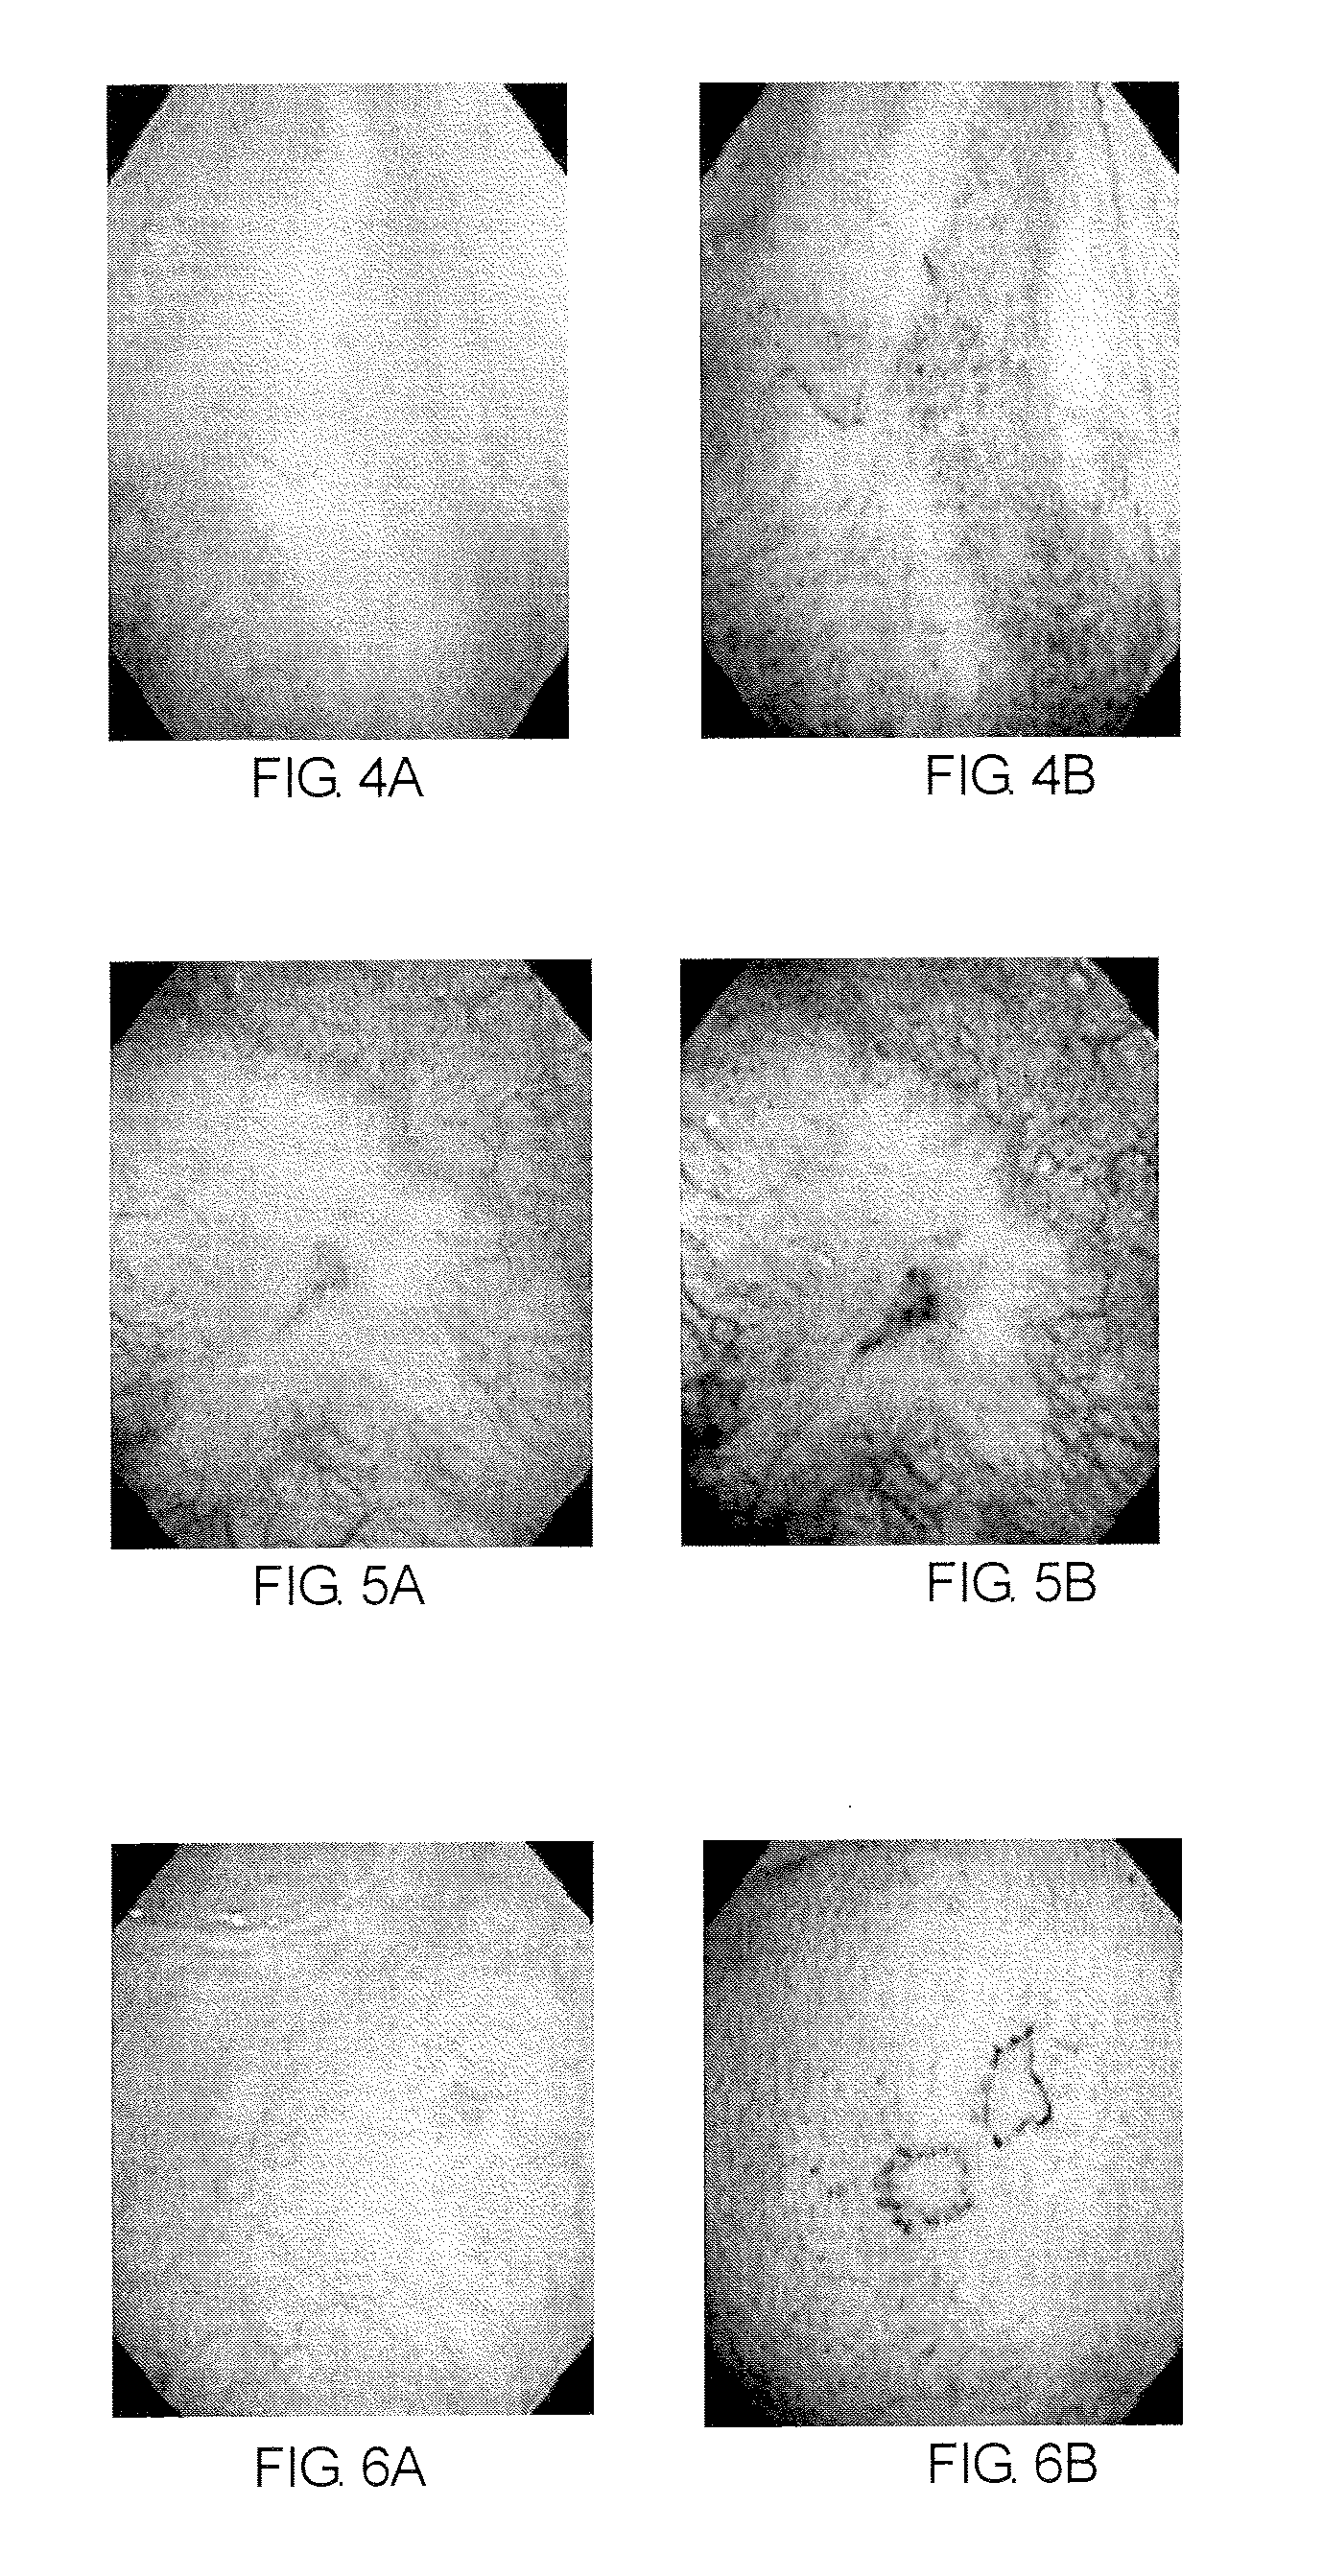 Method of diagnosing a lower urinary tract disorder